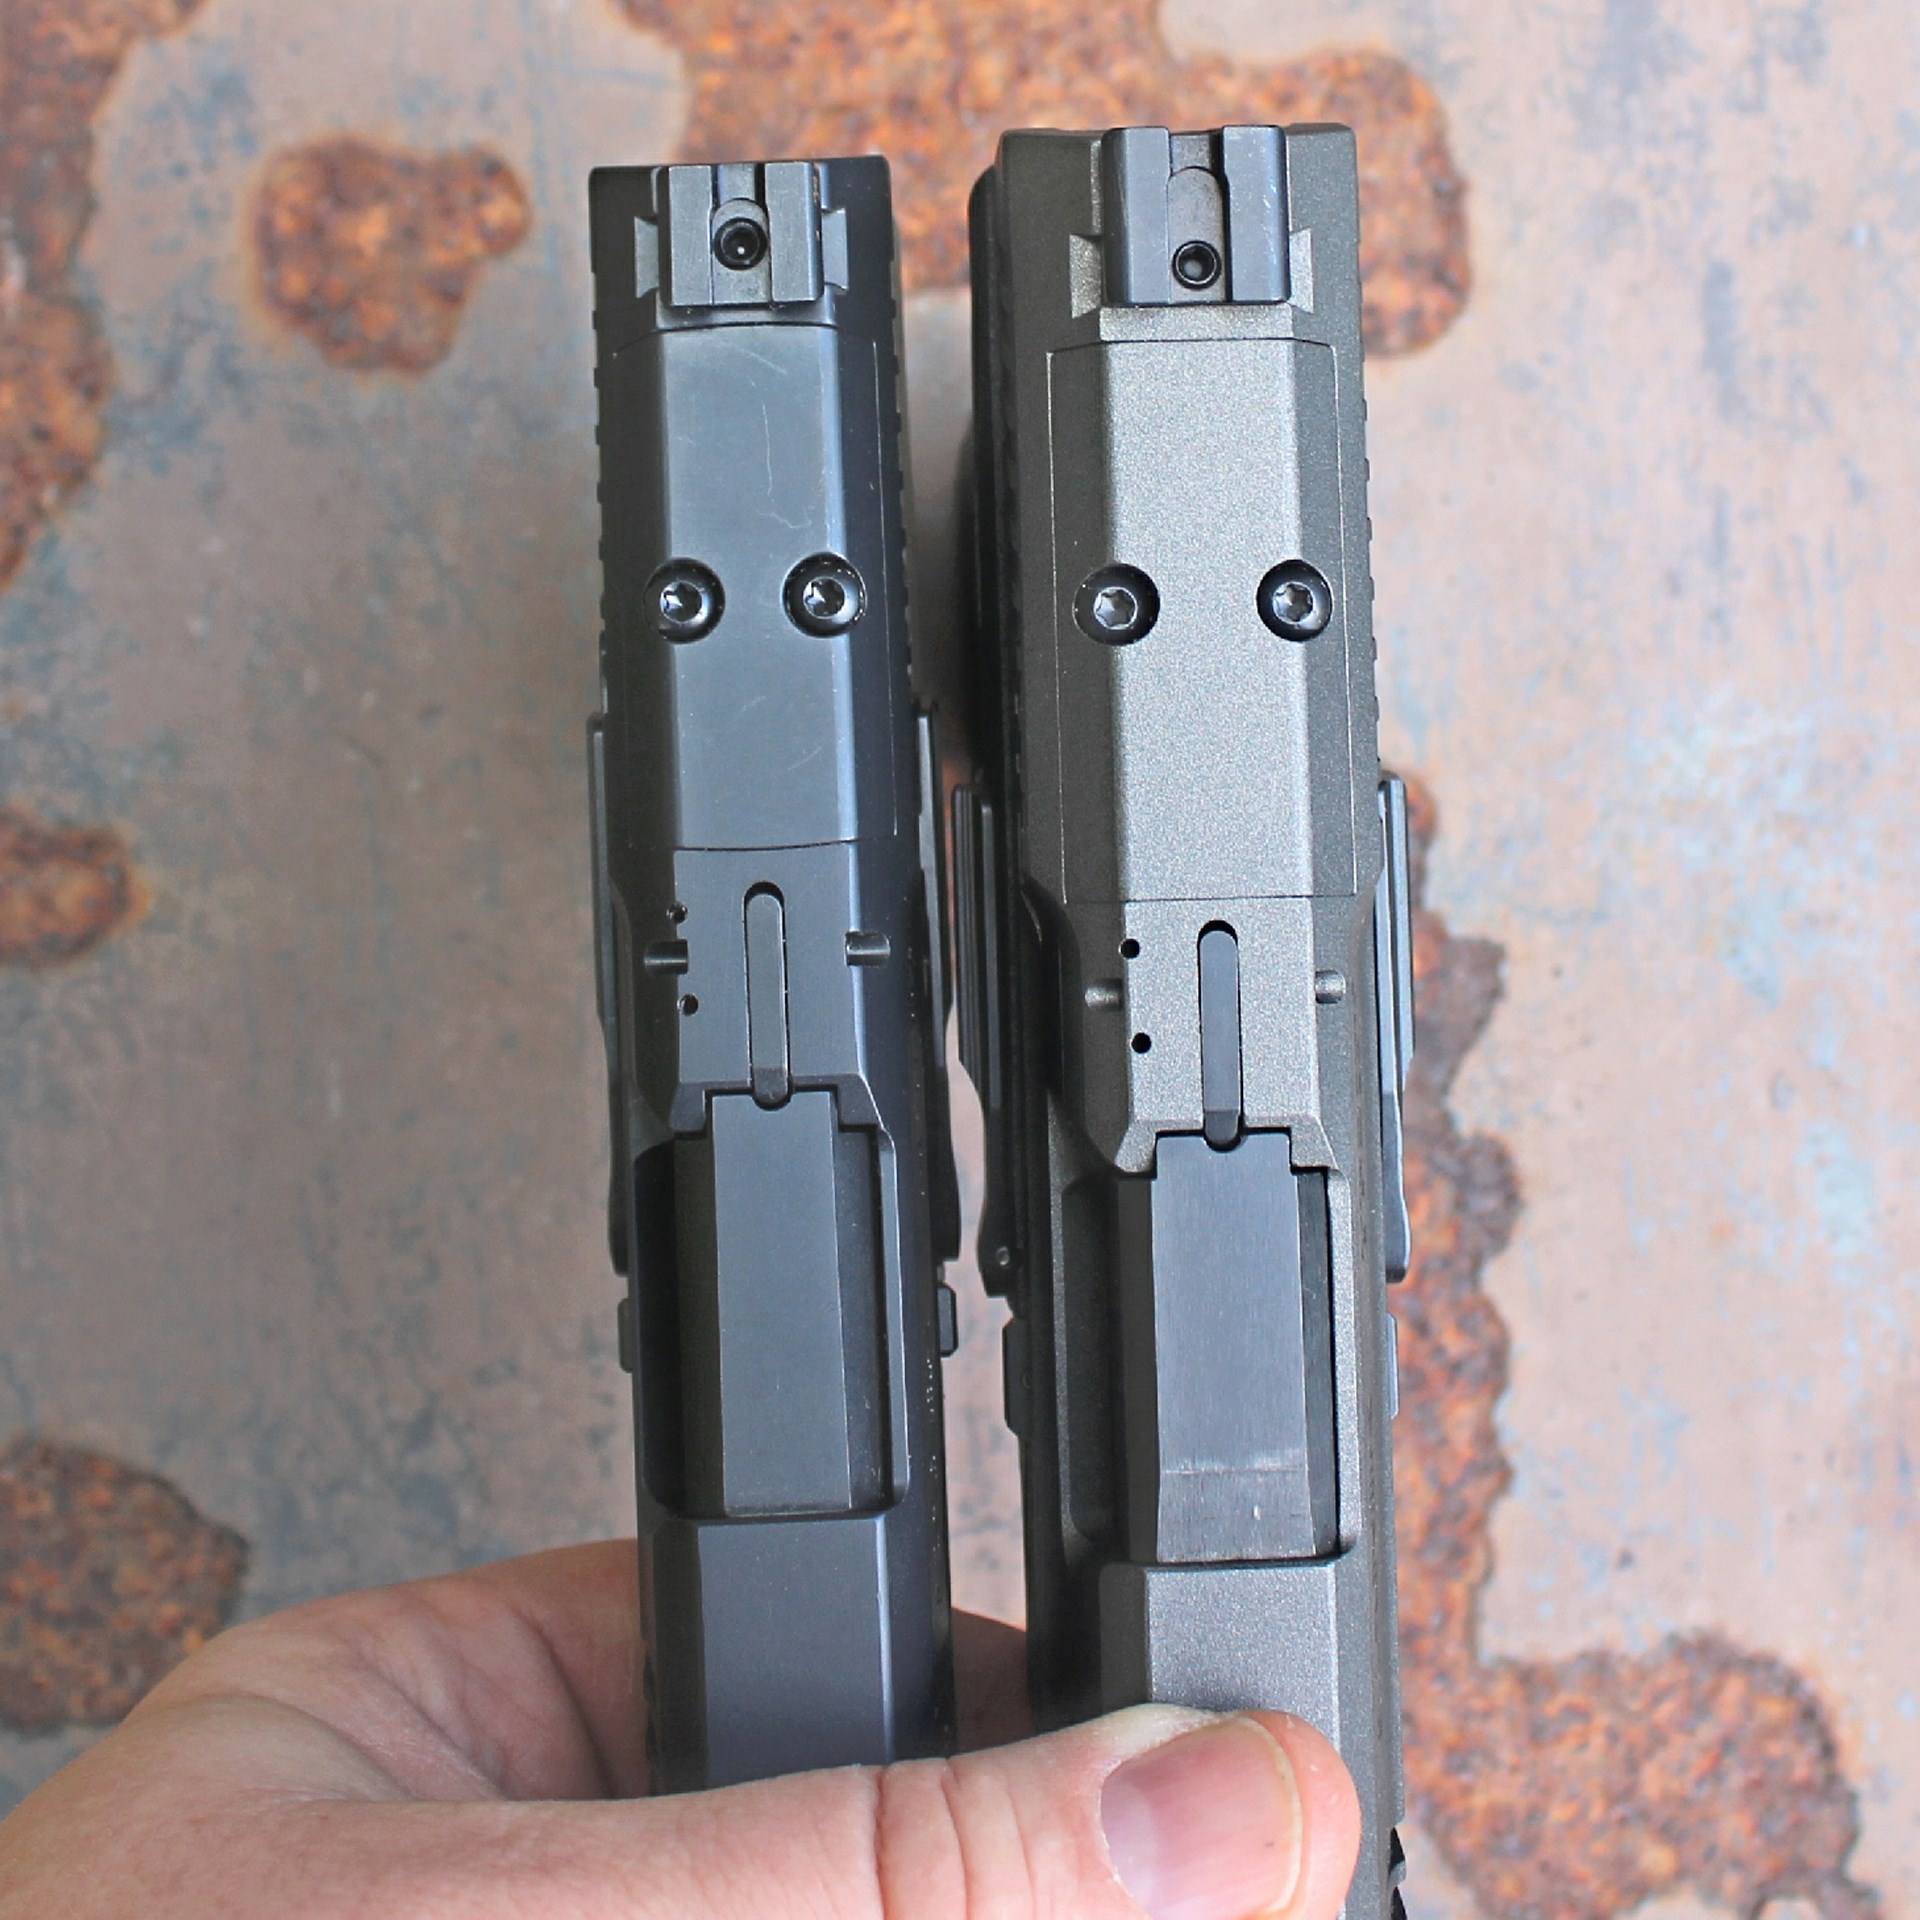 The Mete MC9’s slide (Left) is noticeably slimmer than those of the TP9 series (Right).